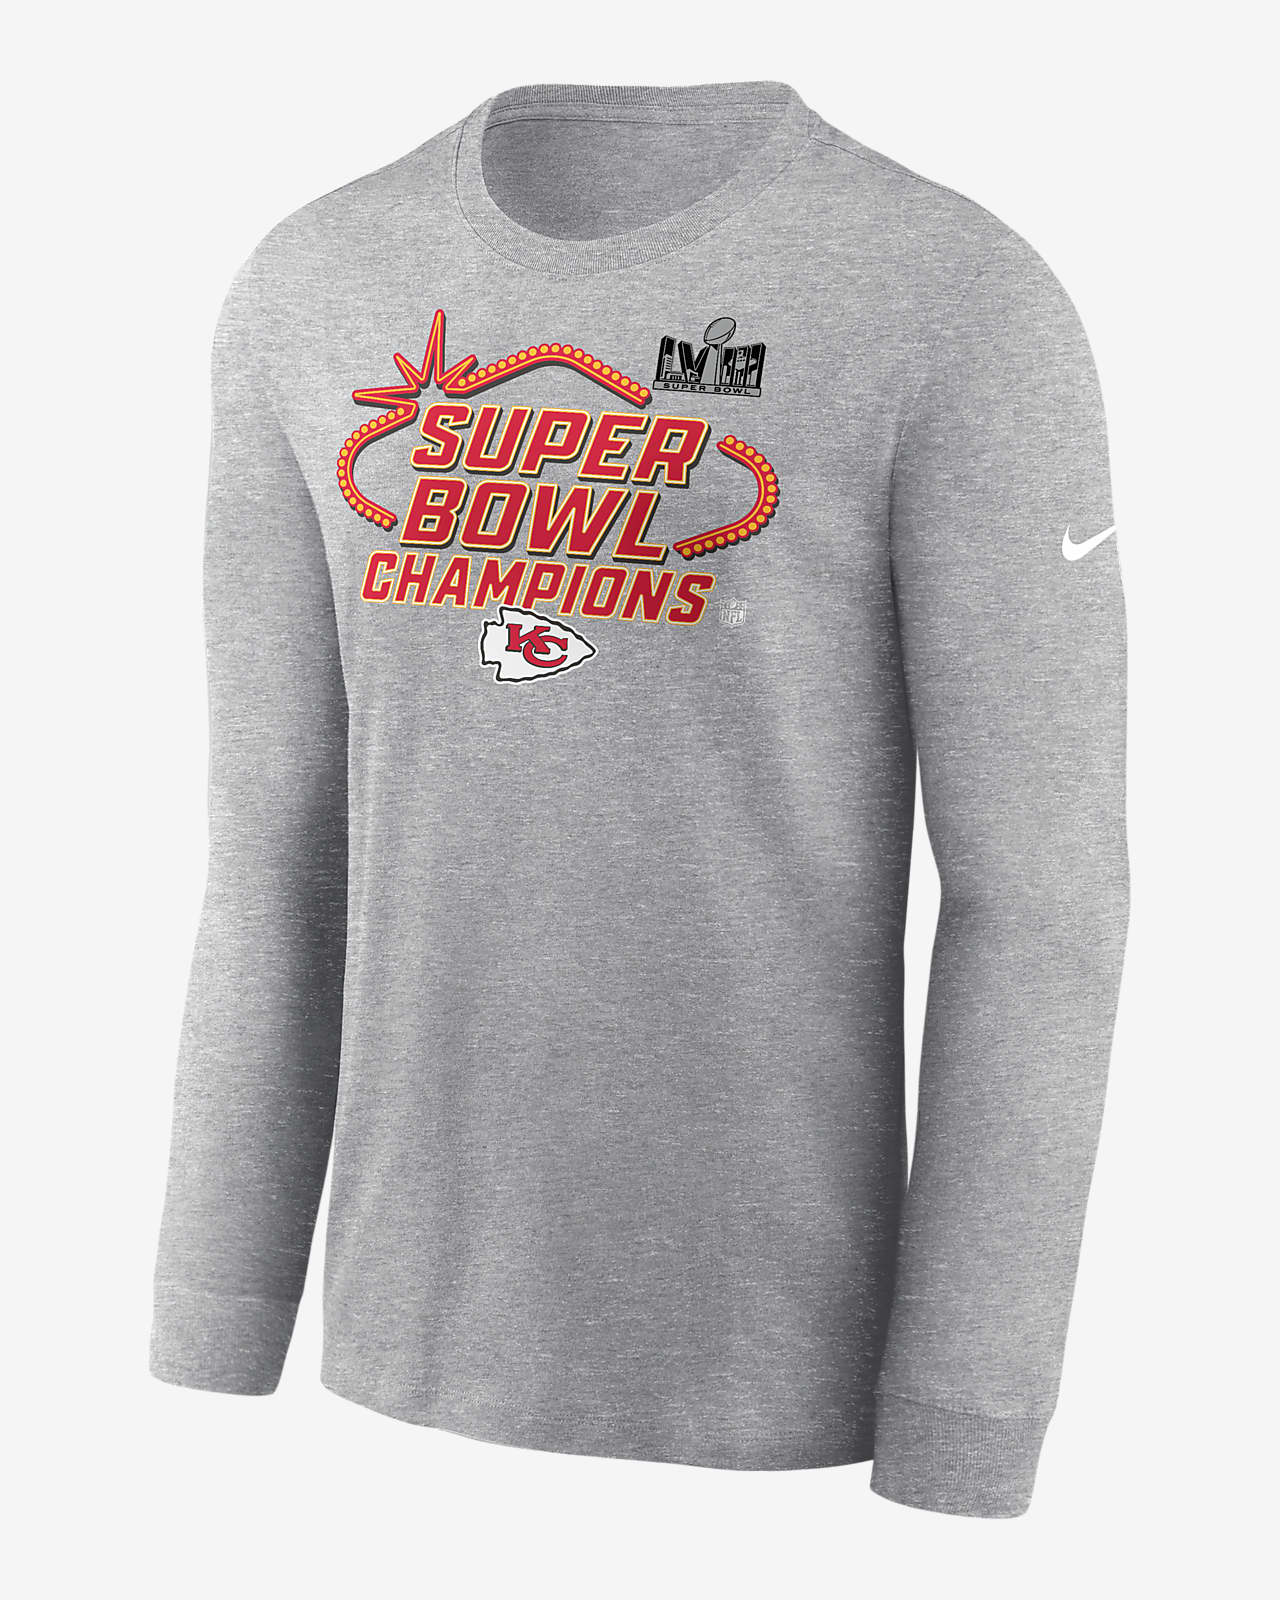 Chiefs Super Bowl victory gear: Get your shirts, hats and